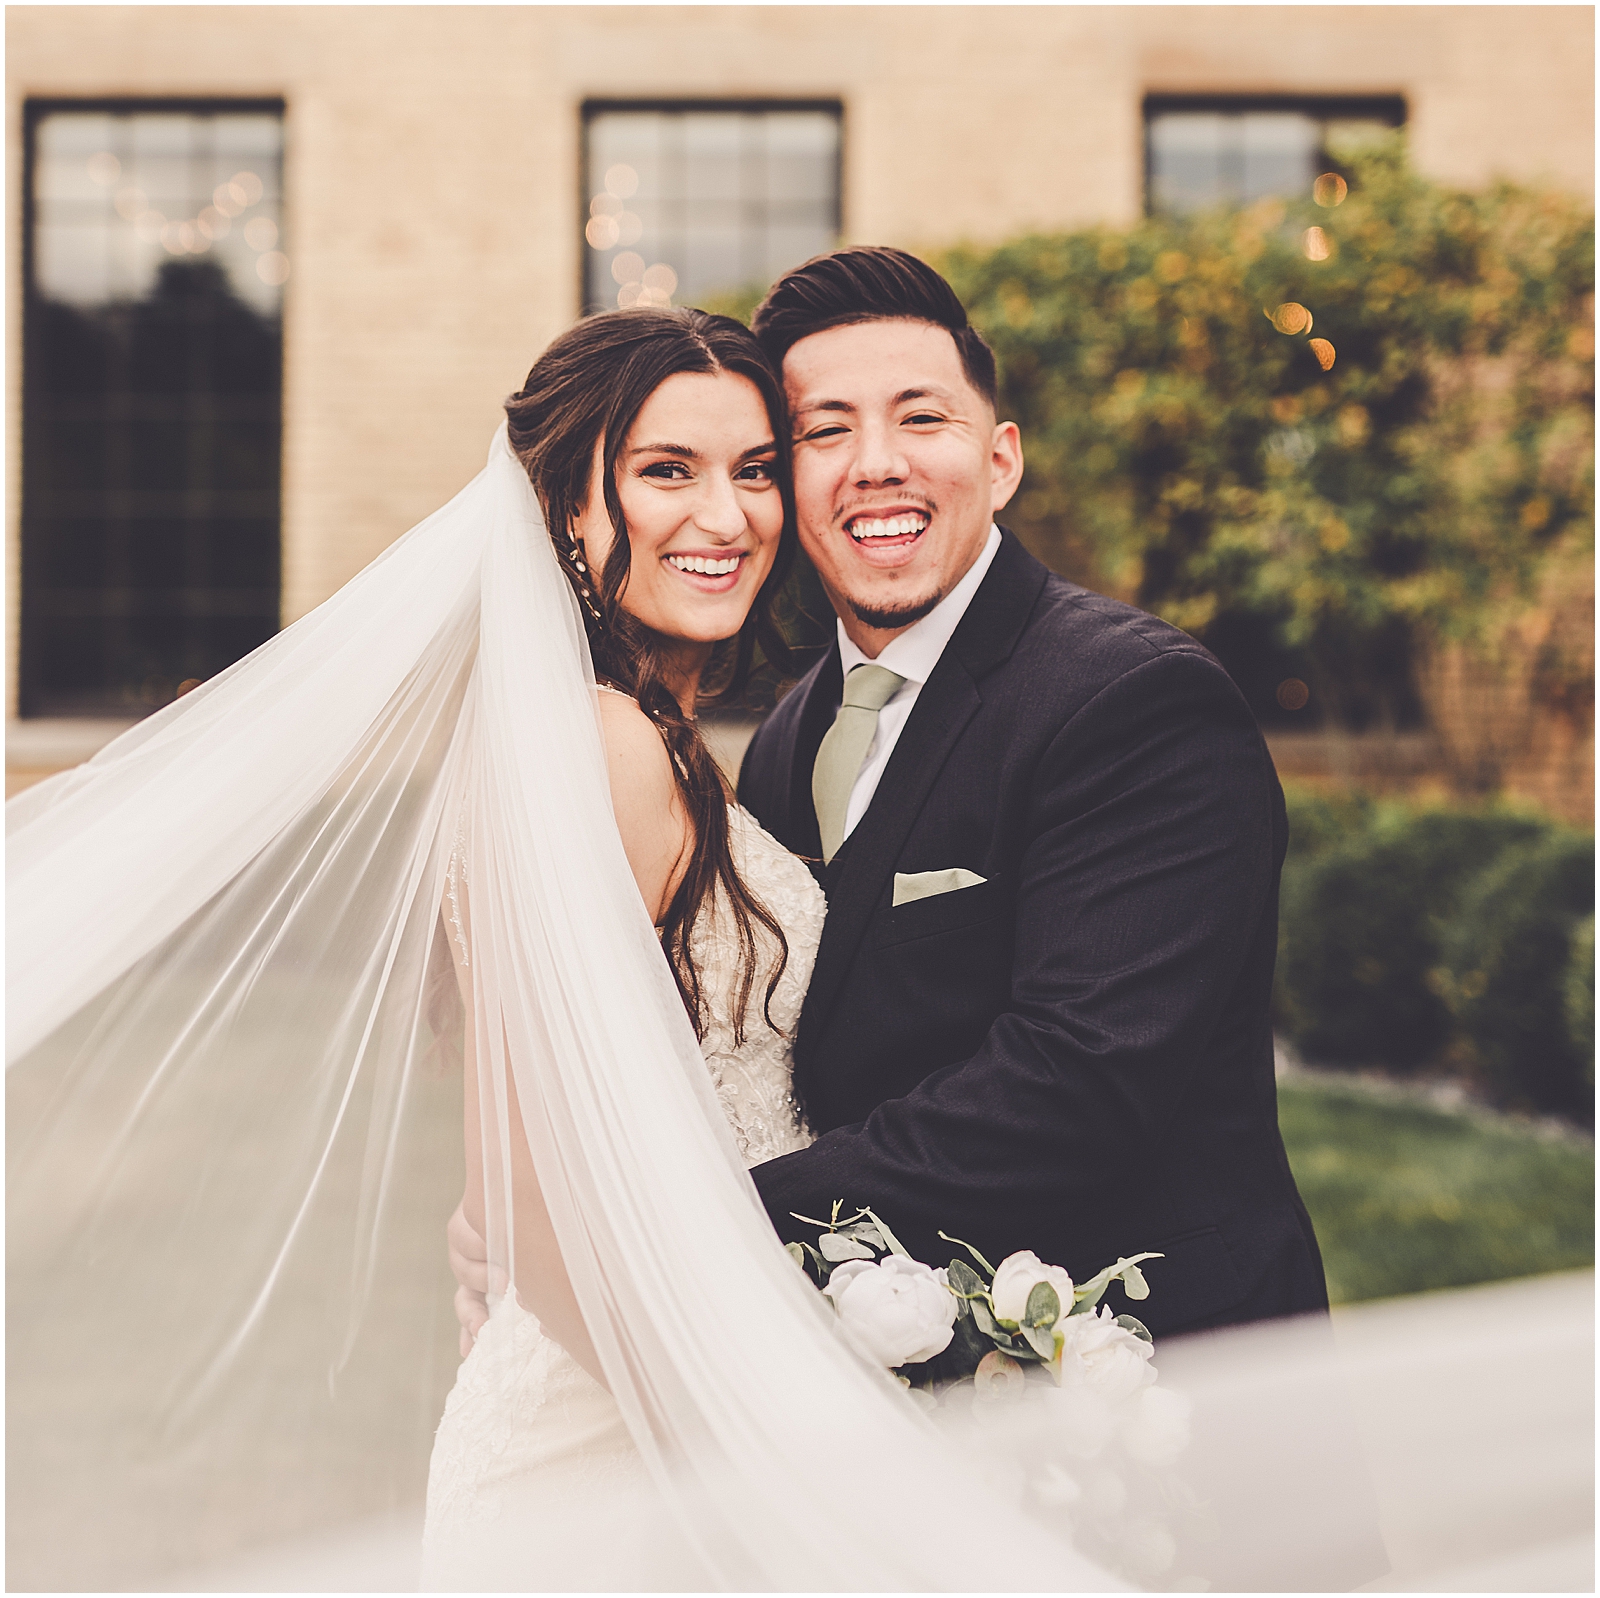 Alyssa and Paul's wedding day at The BRIX in Carpentersville, Illinois with Chicagoland wedding photographer Kara Evans Photographer.